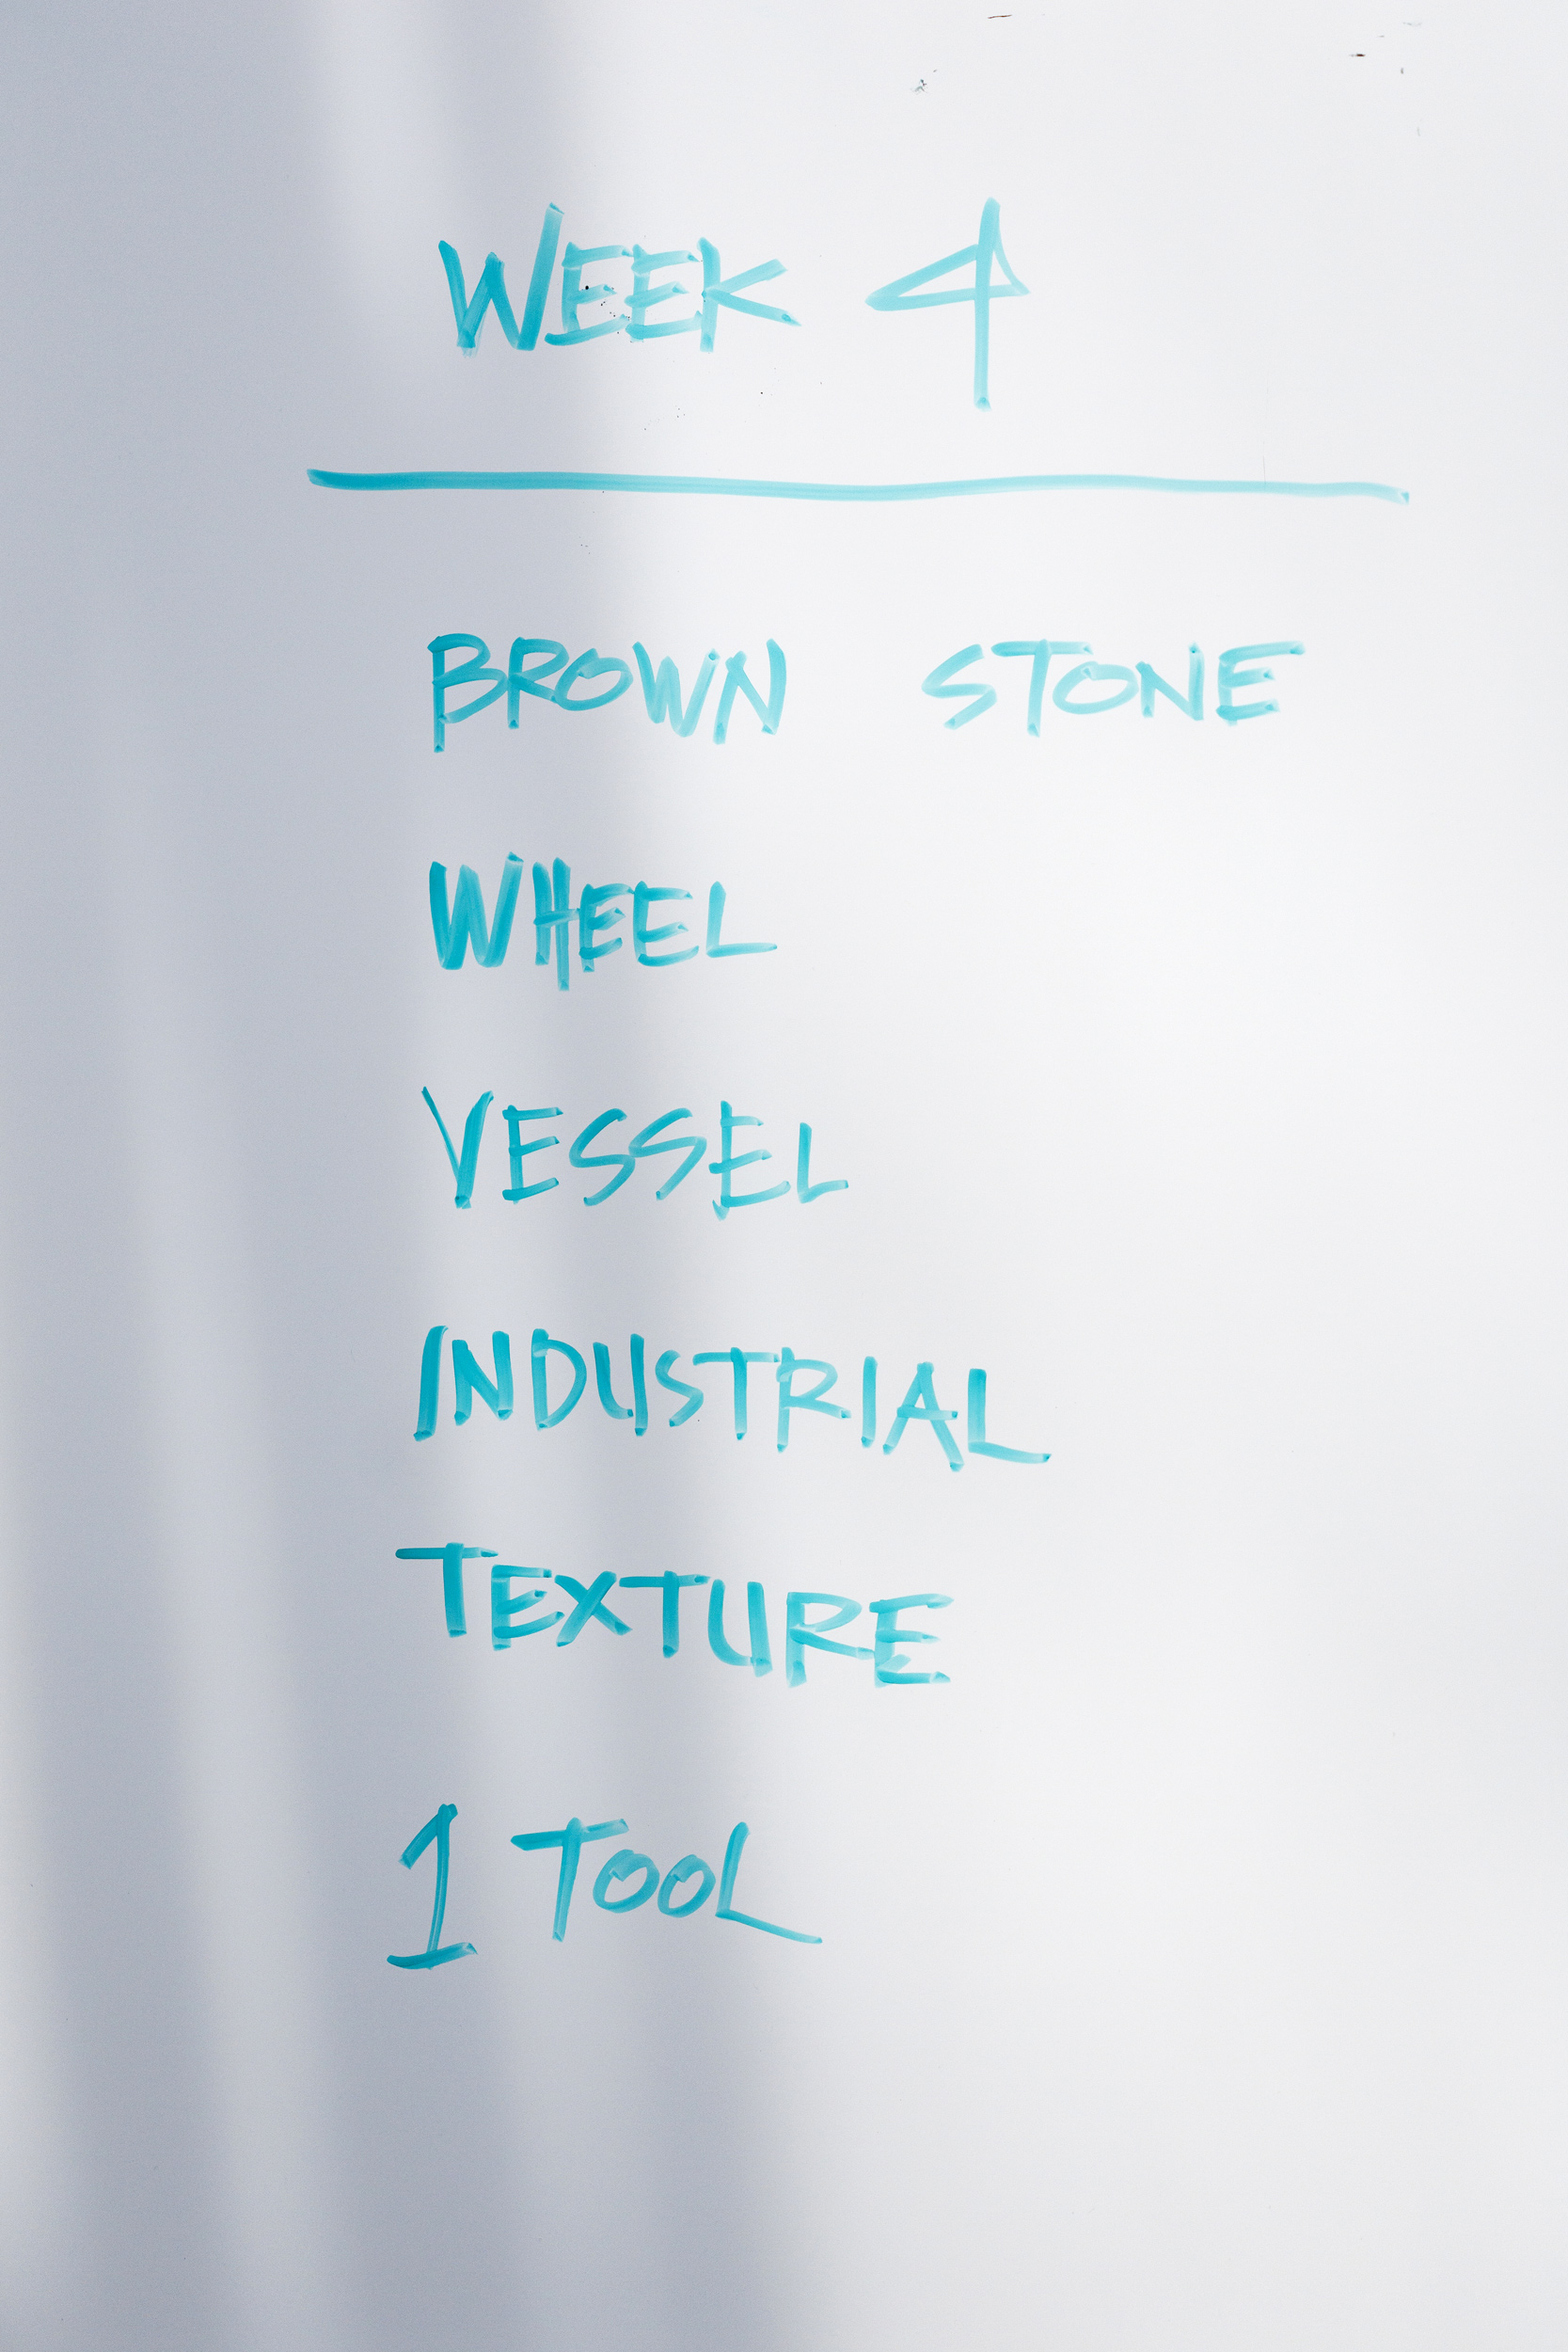 The Randomizer Week 4 directives - brown stone, wheel, vessel, industrial, texture, one tool - are outlined on a whiteboard.